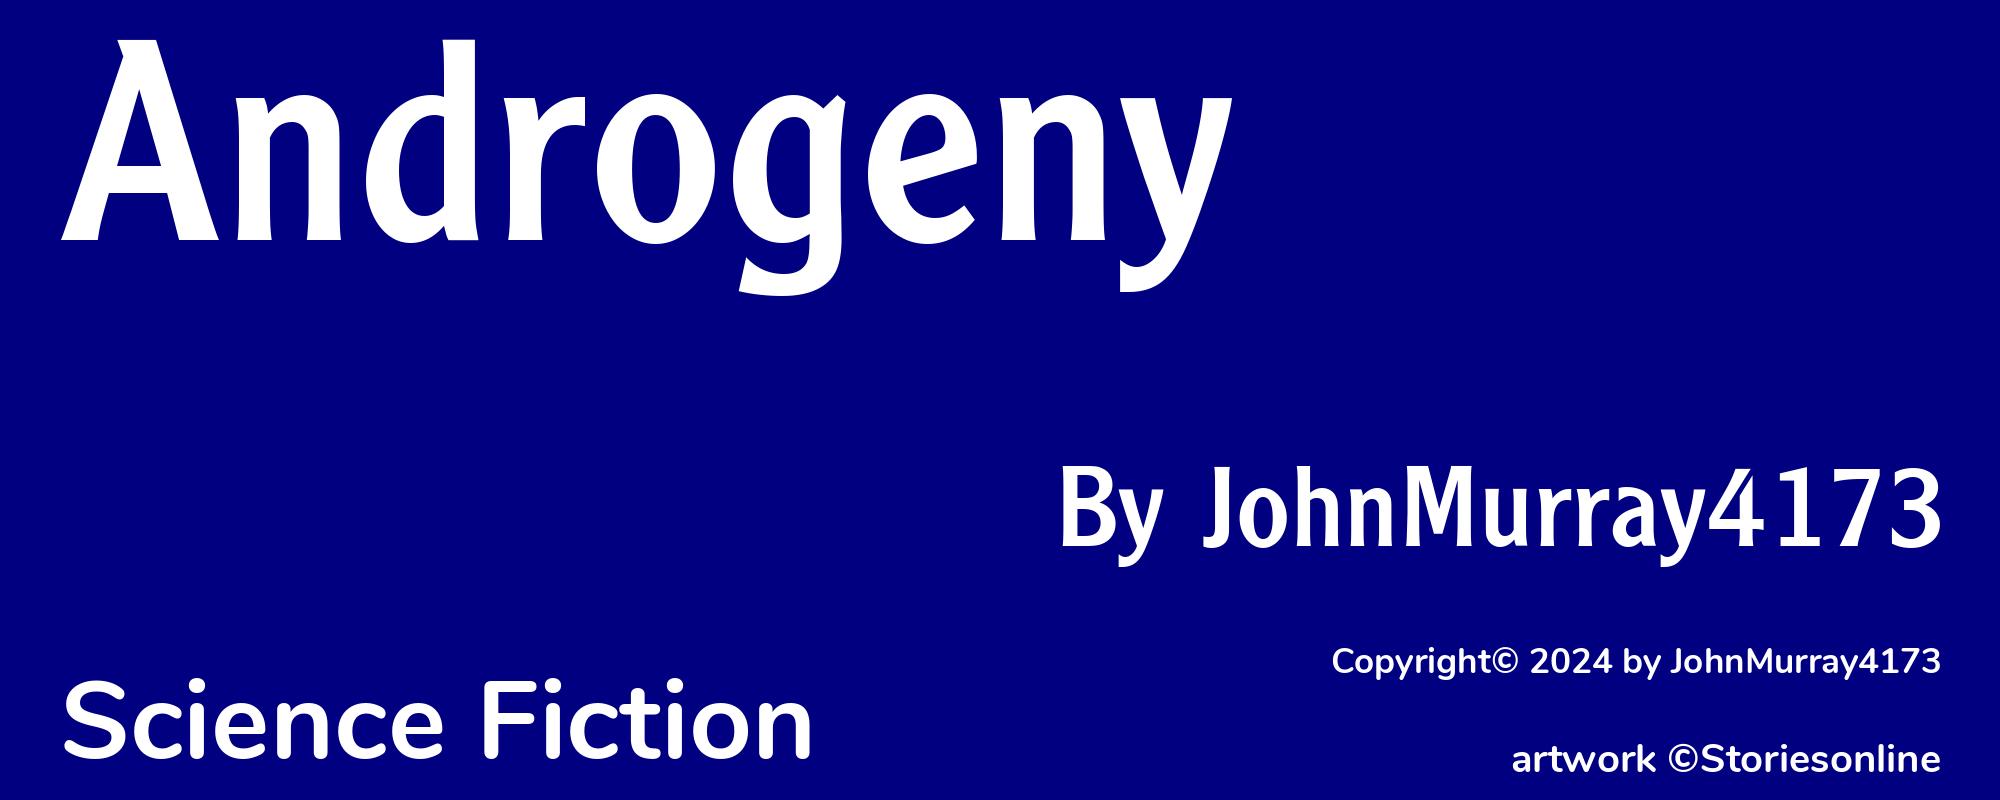 Androgeny - Cover